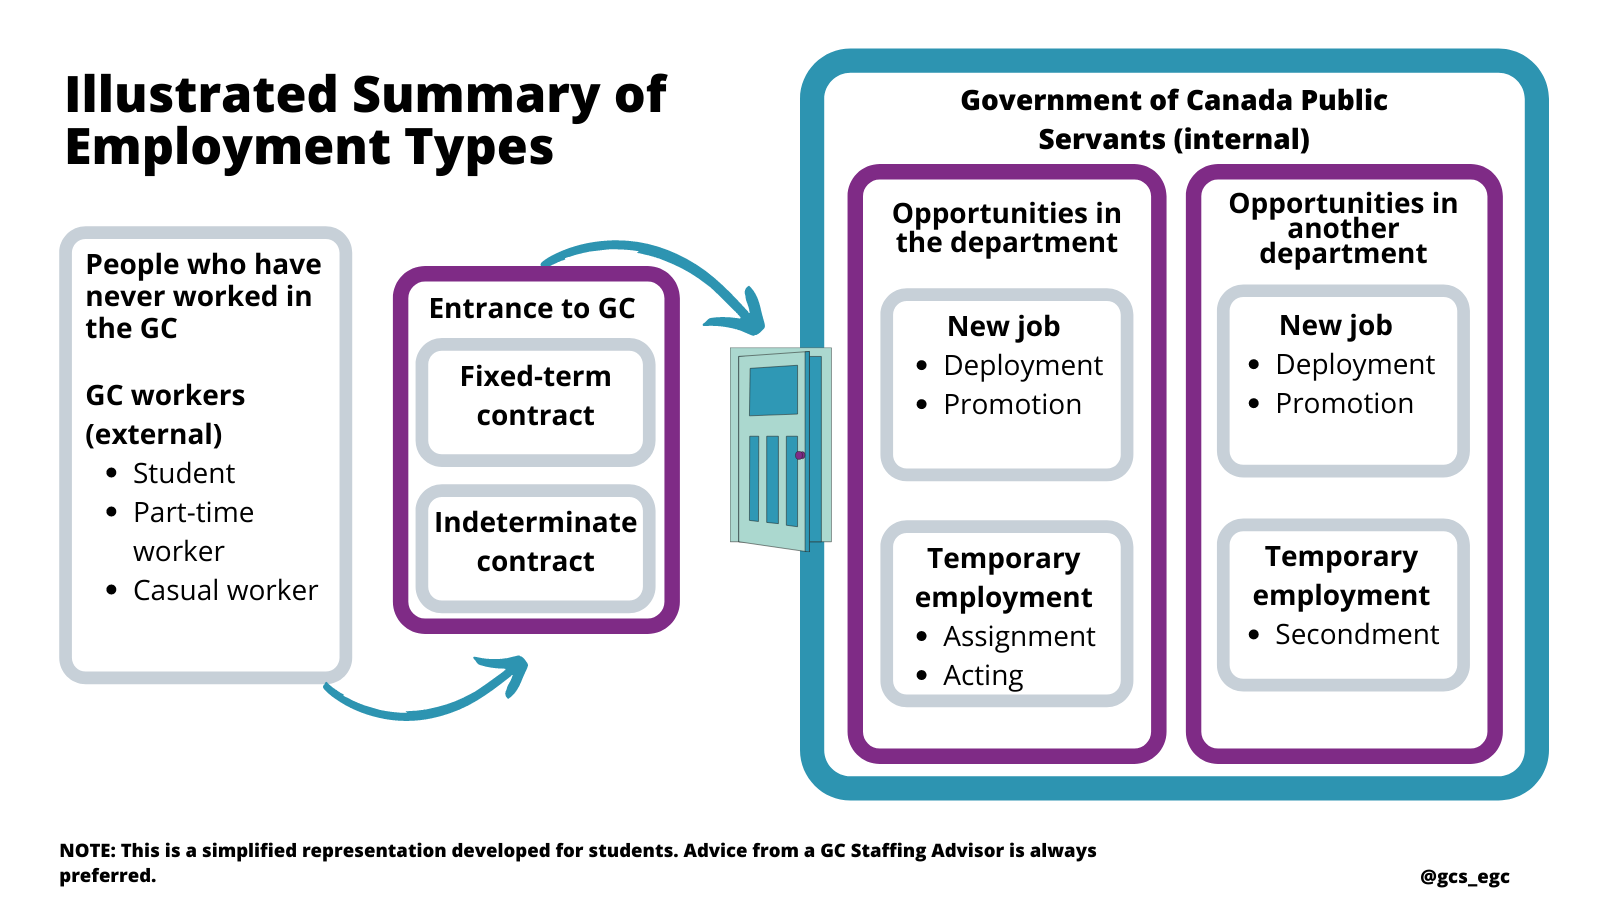 STUDENTS - Types of employment